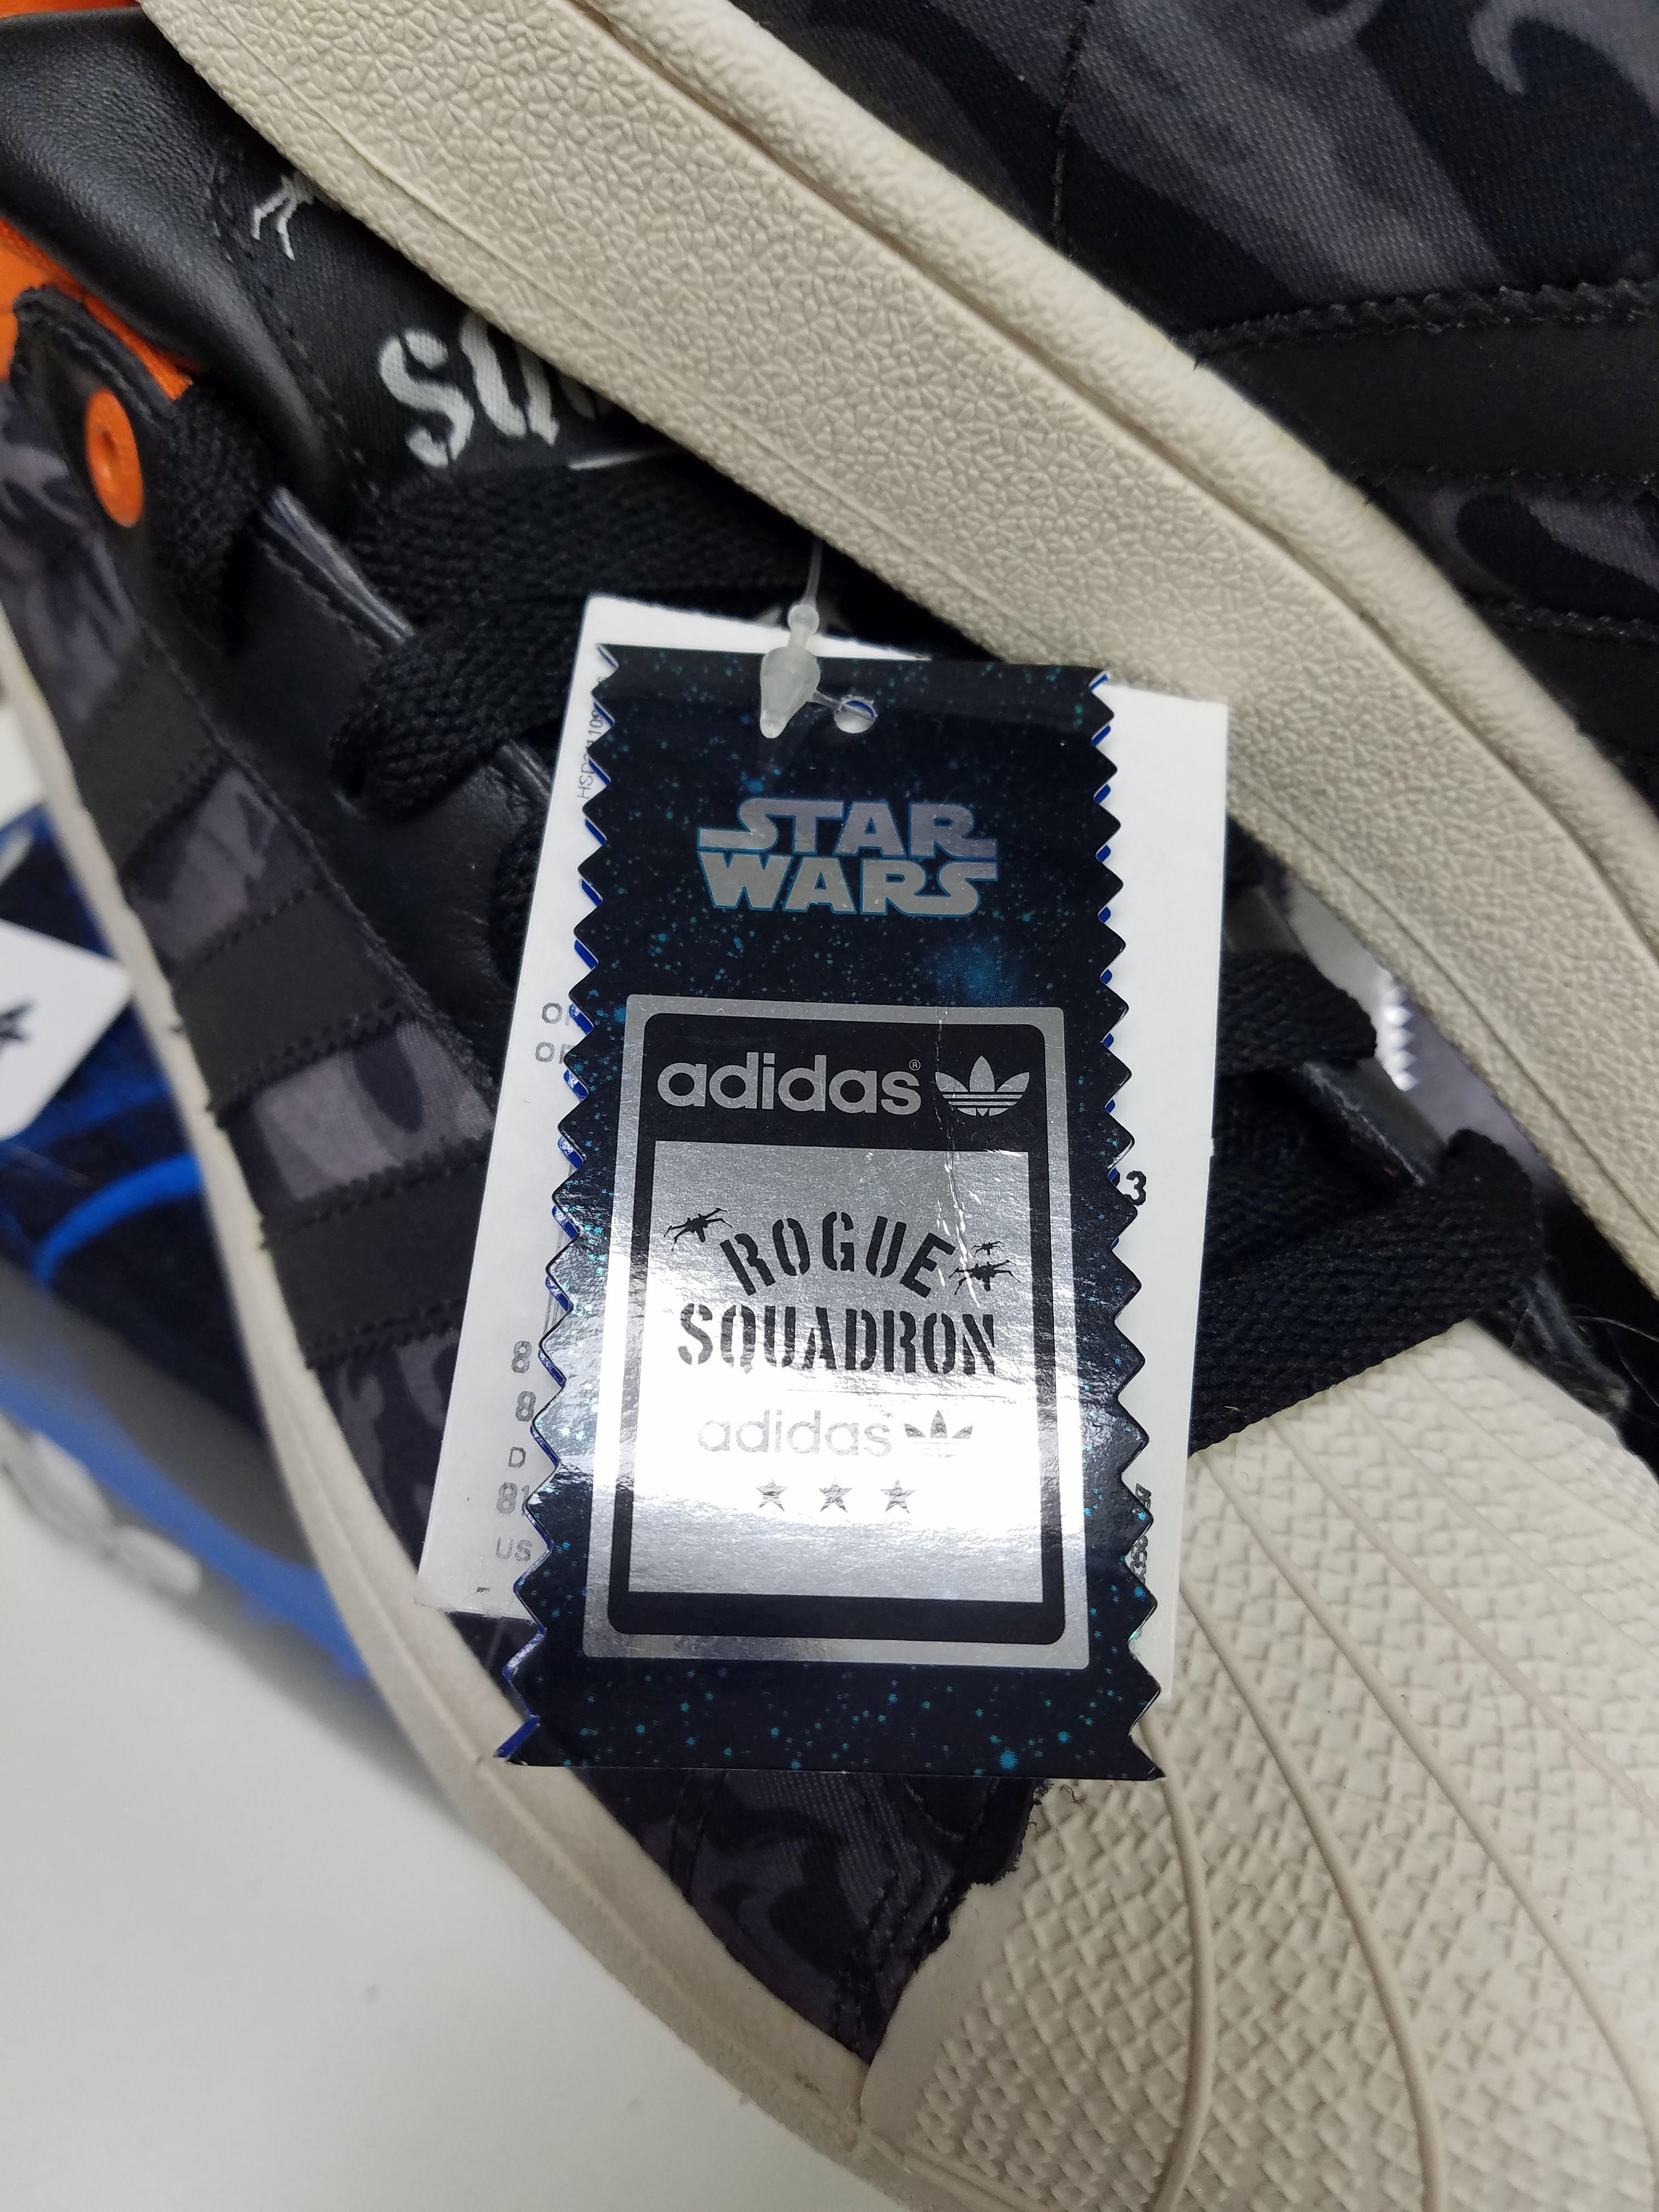 Adidas Star Wars Limited Edition Superstar ii SW Size 8.5 8 1/2 Shoe with Box